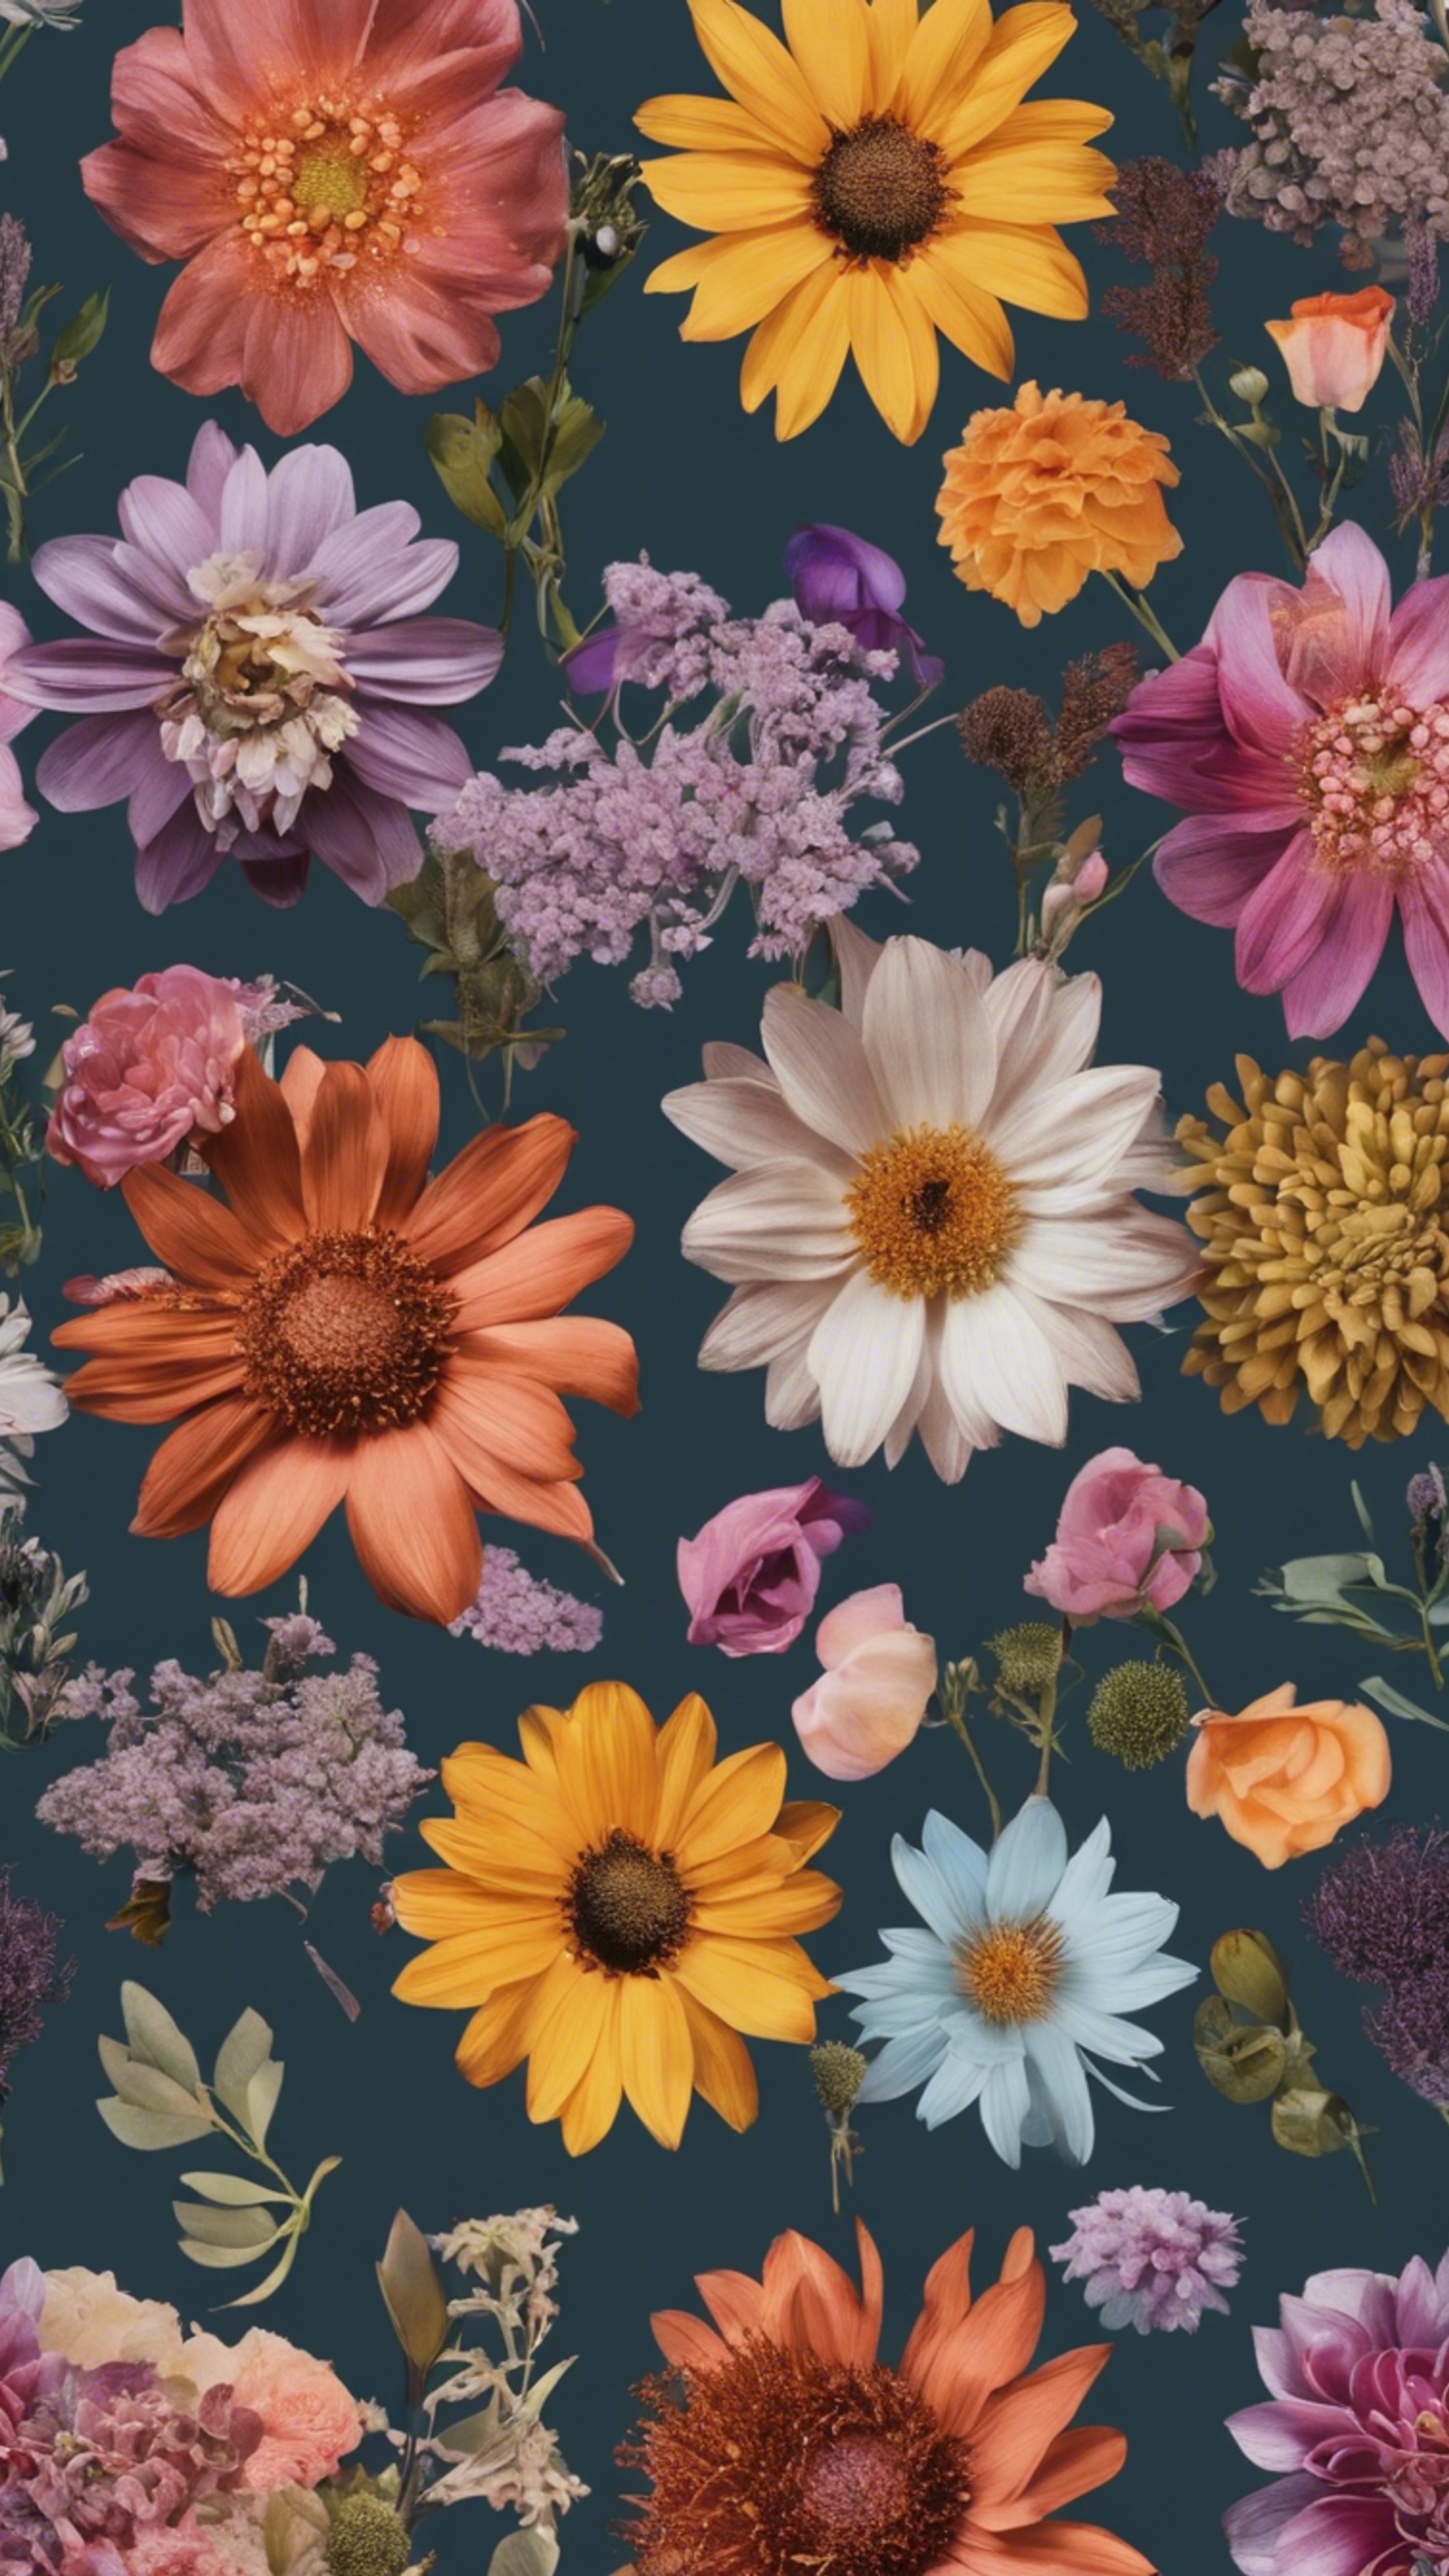 Multiple flowers of different types and colors, distinctively arranged in a bohemian floral design pattern. วอลล์เปเปอร์[d475d4e8f3a0489d92d5]